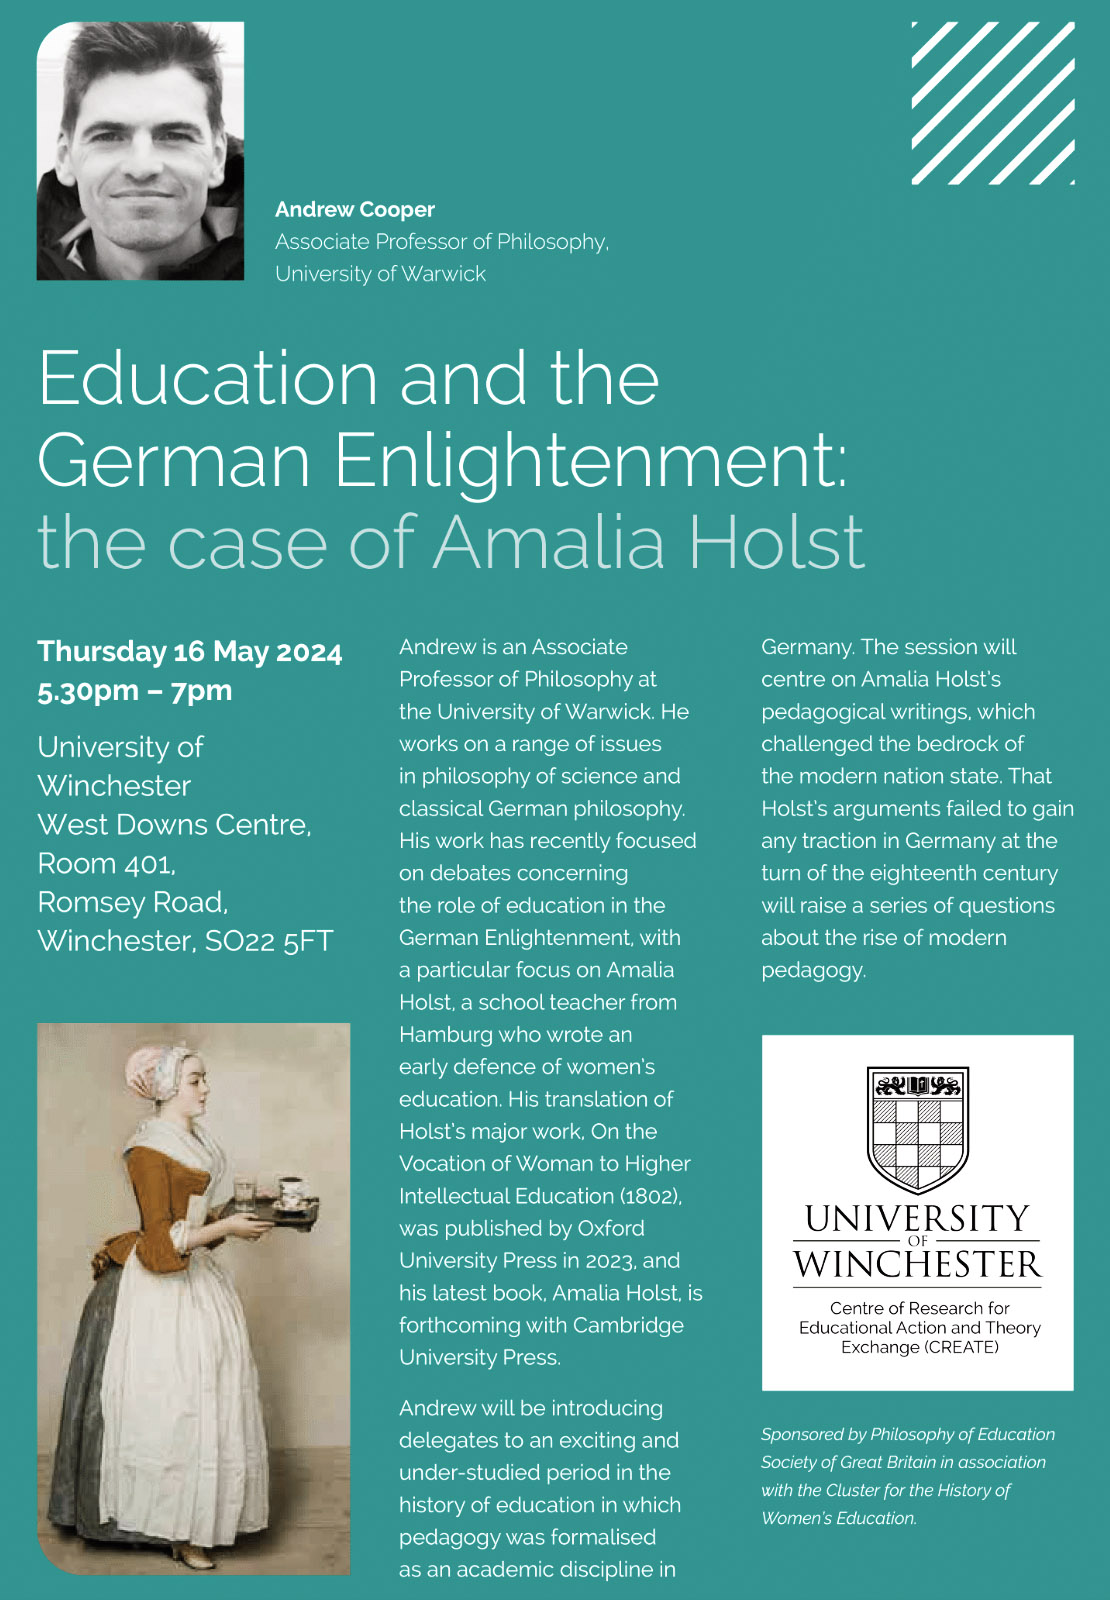 University of Winchester flyer for philosophy of education event May 2024